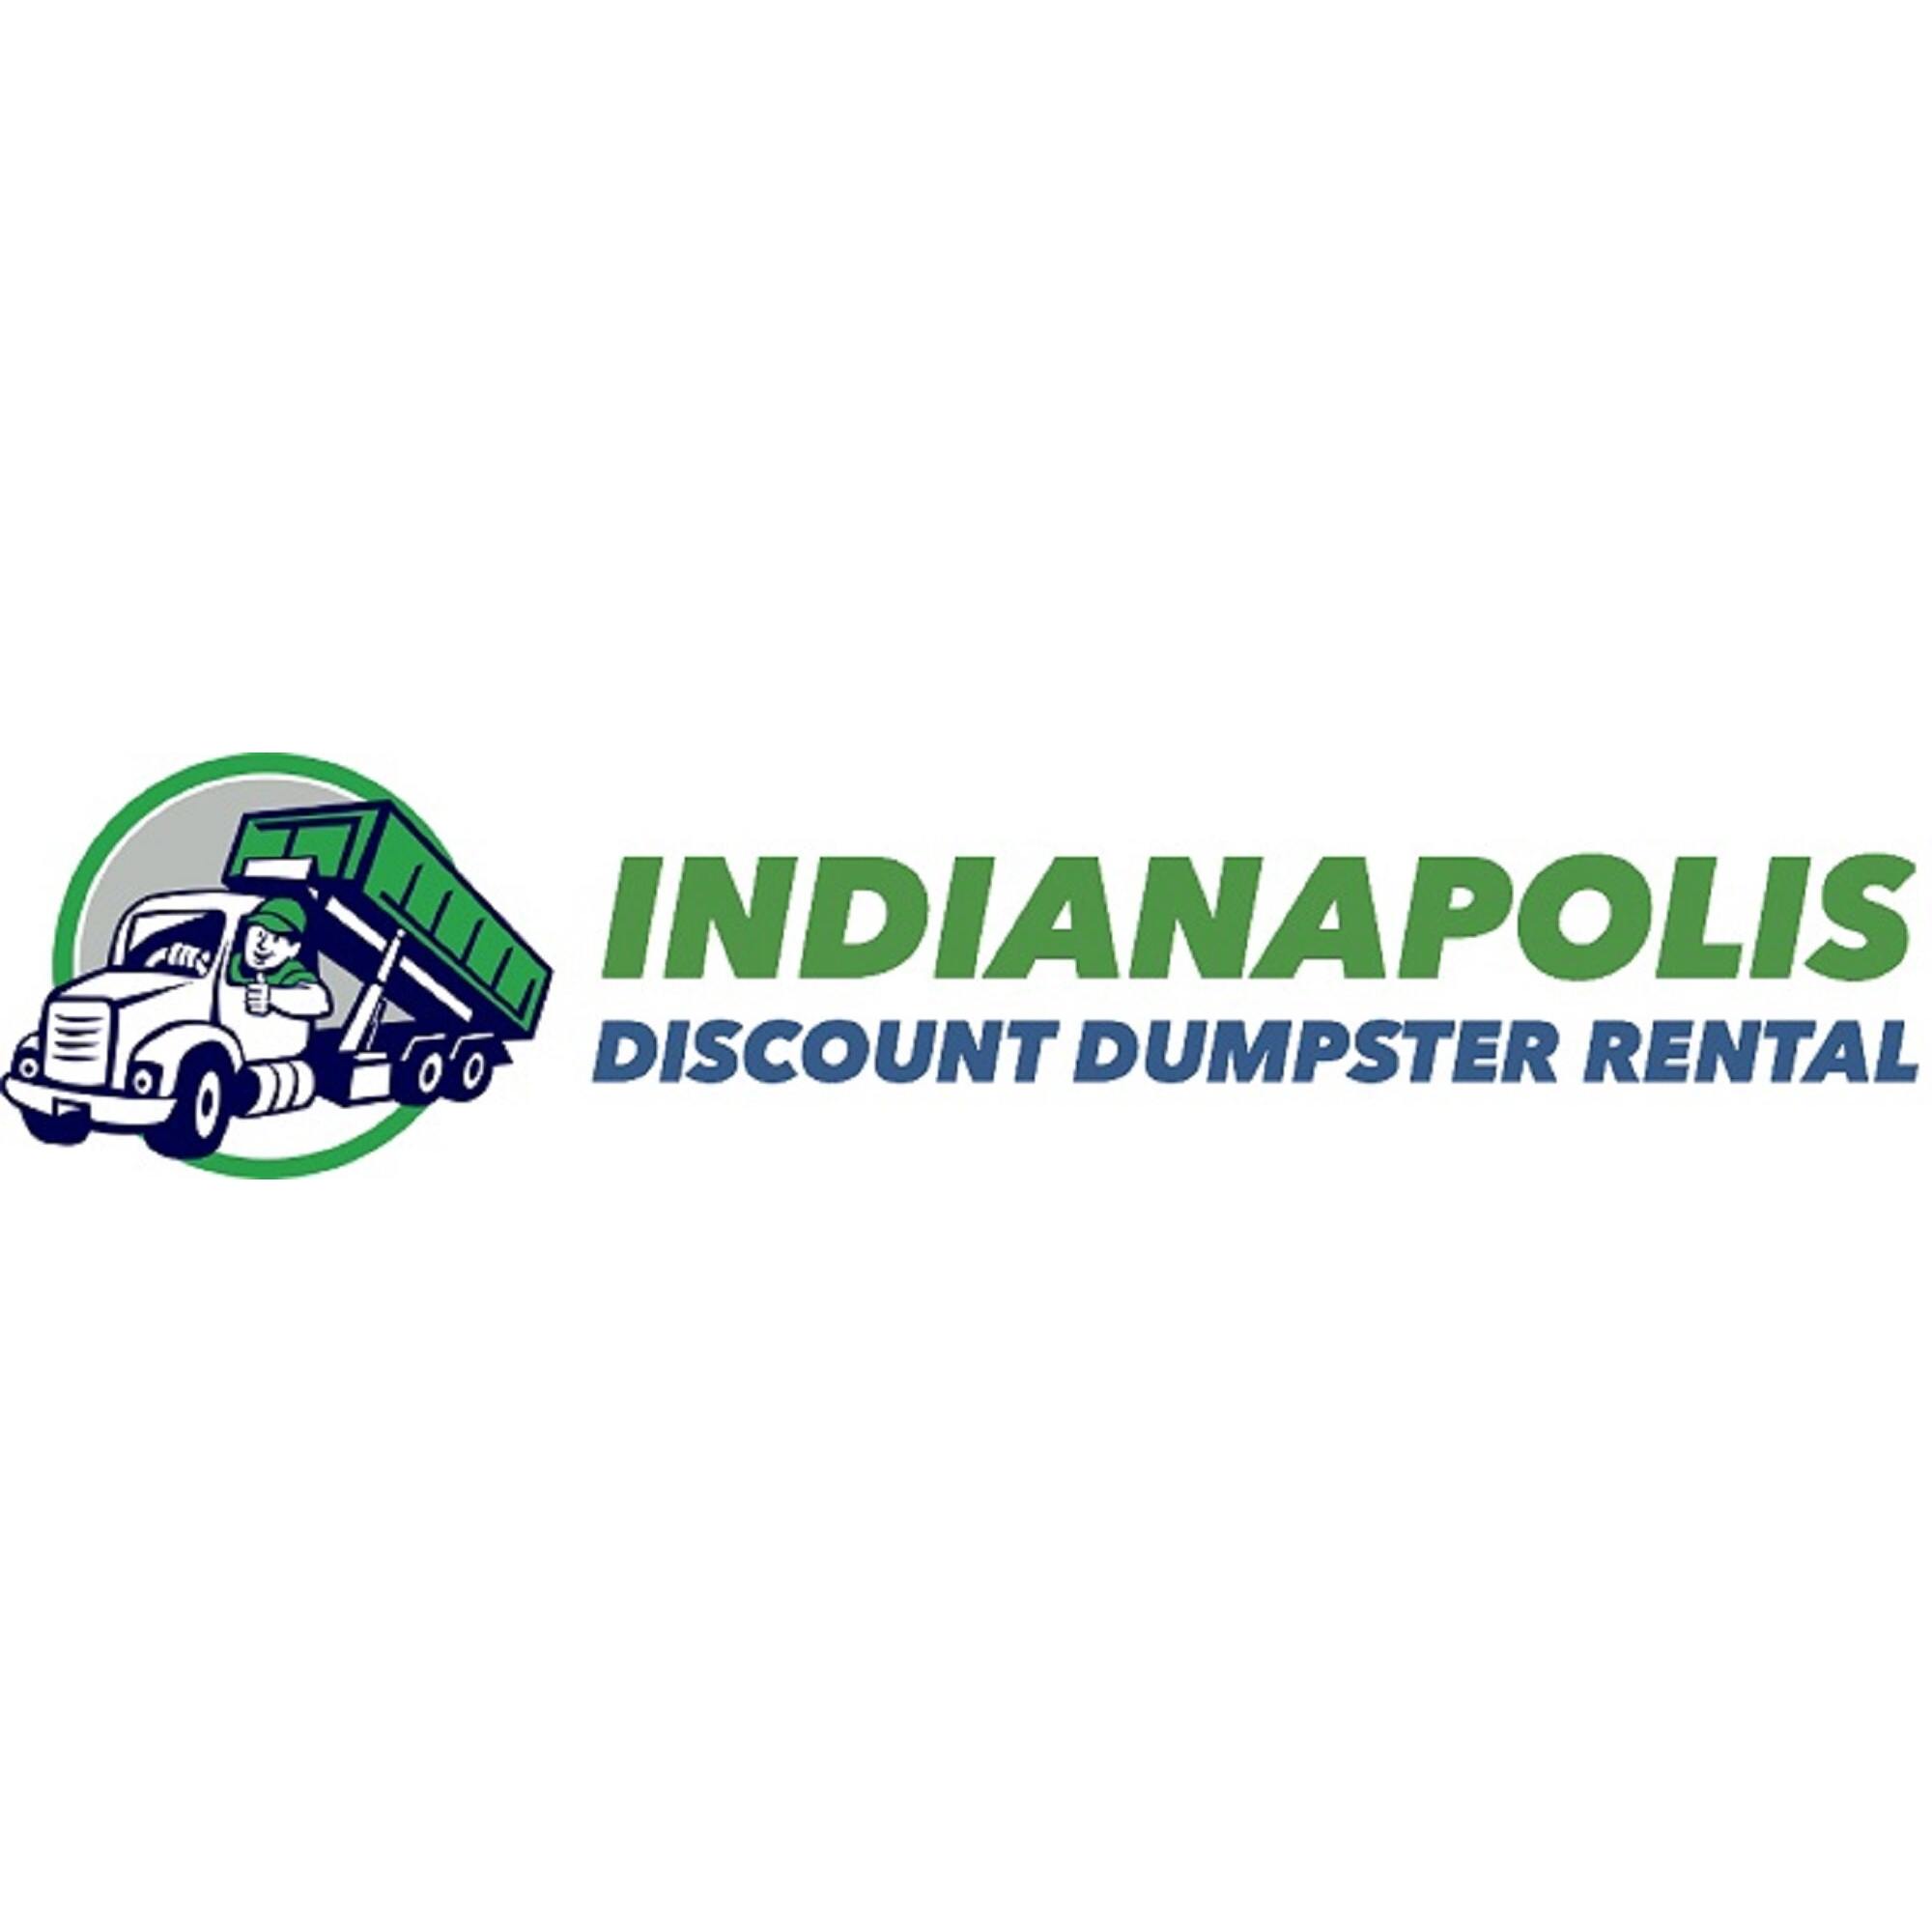 Discount Dumpster Rental Indianapolis - Indianapolis, IN 46205 - (317)794-2564 | ShowMeLocal.com